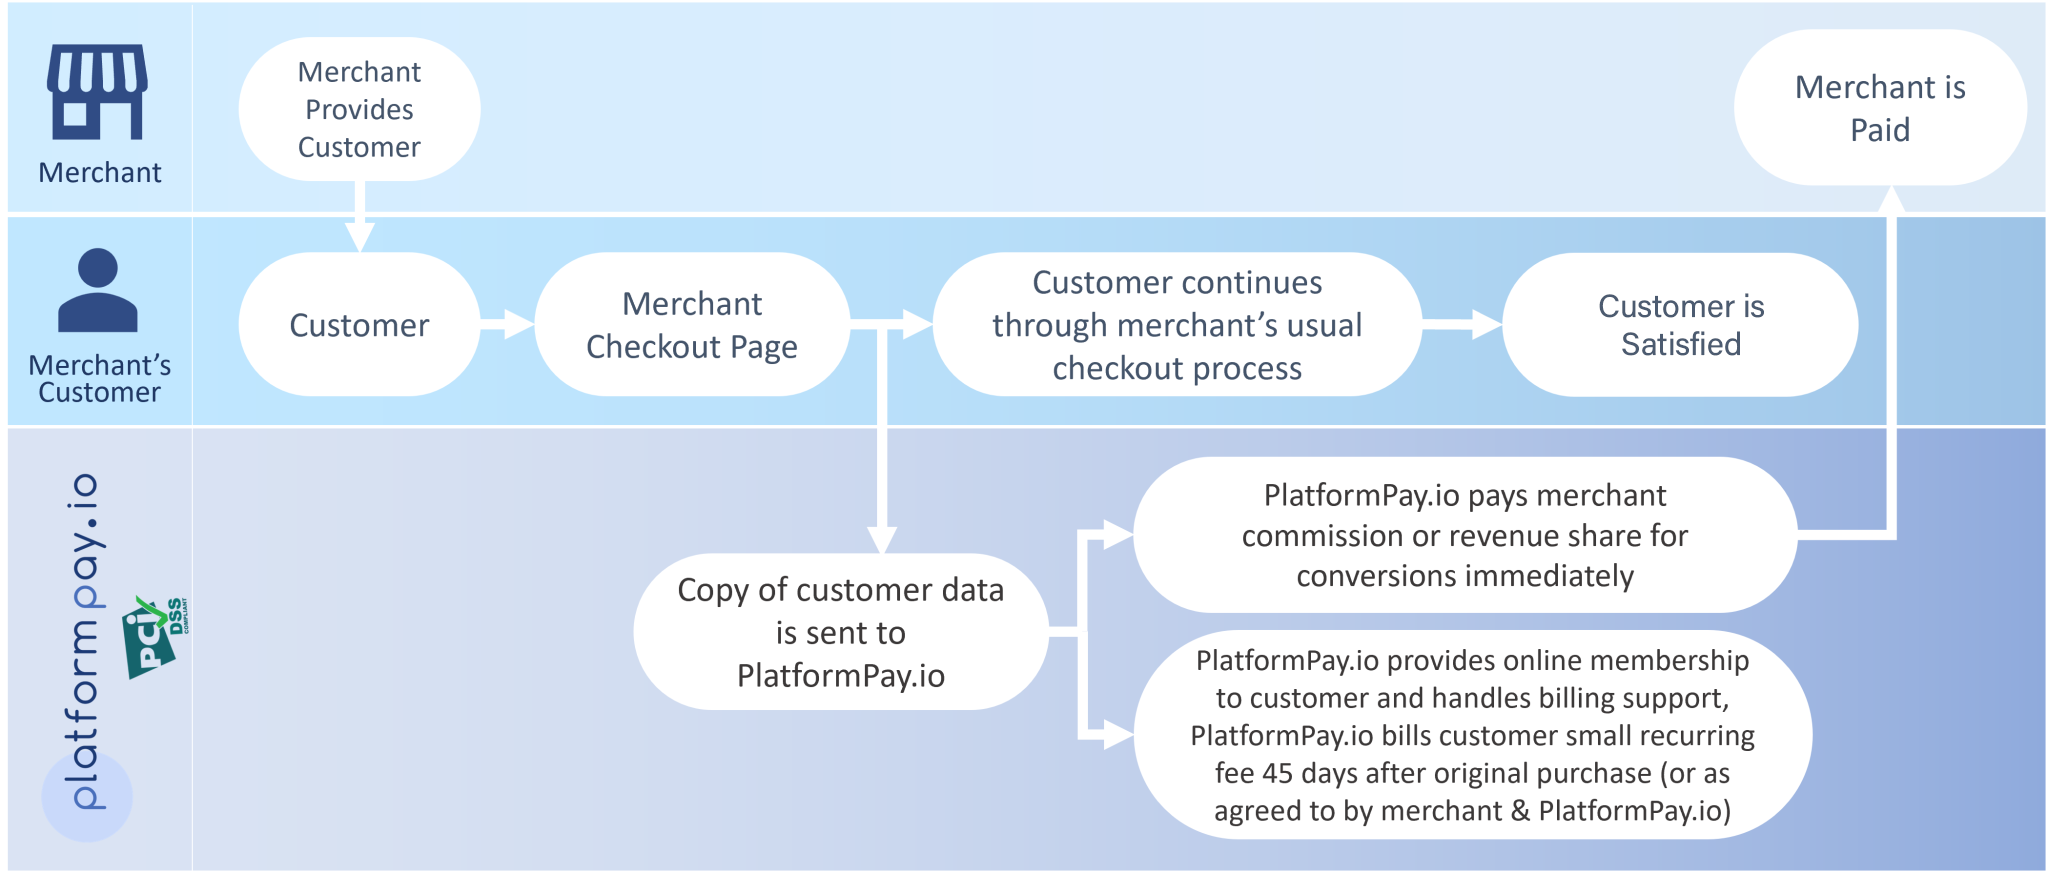 PlatformPay.io: Navigating Optimal Payment Processing for Your Business